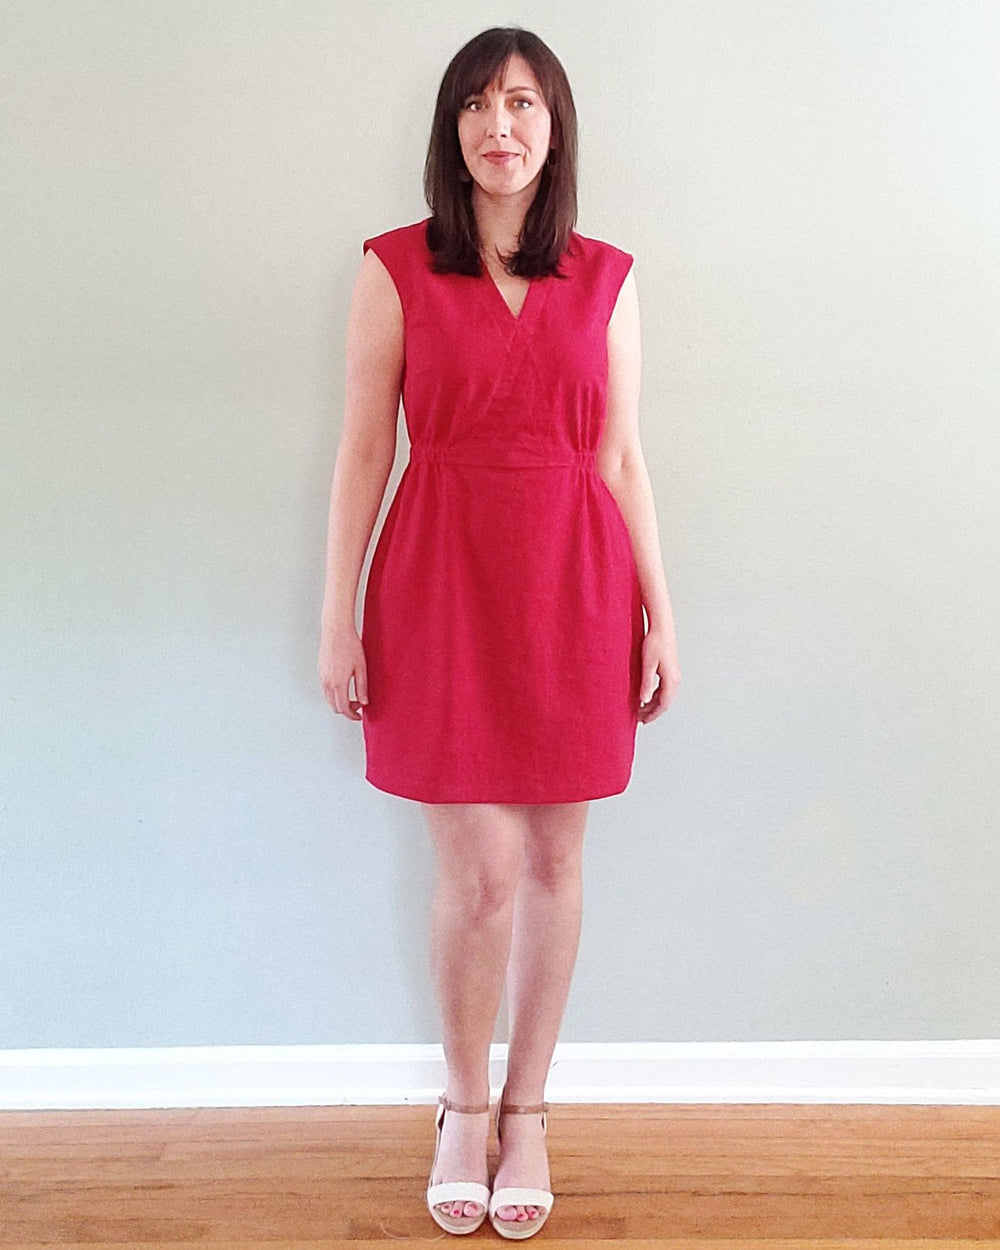 Woman wearing the Ava Dress sewing pattern by Pattern Scout. A sleeveless dress pattern made in linen, cotton sateen/lawn/batiste/chambray, rayon, lyocell or Tencel fabrics, featuring a faux wrap bodice, elasticated waist, above knee length finish and V-n